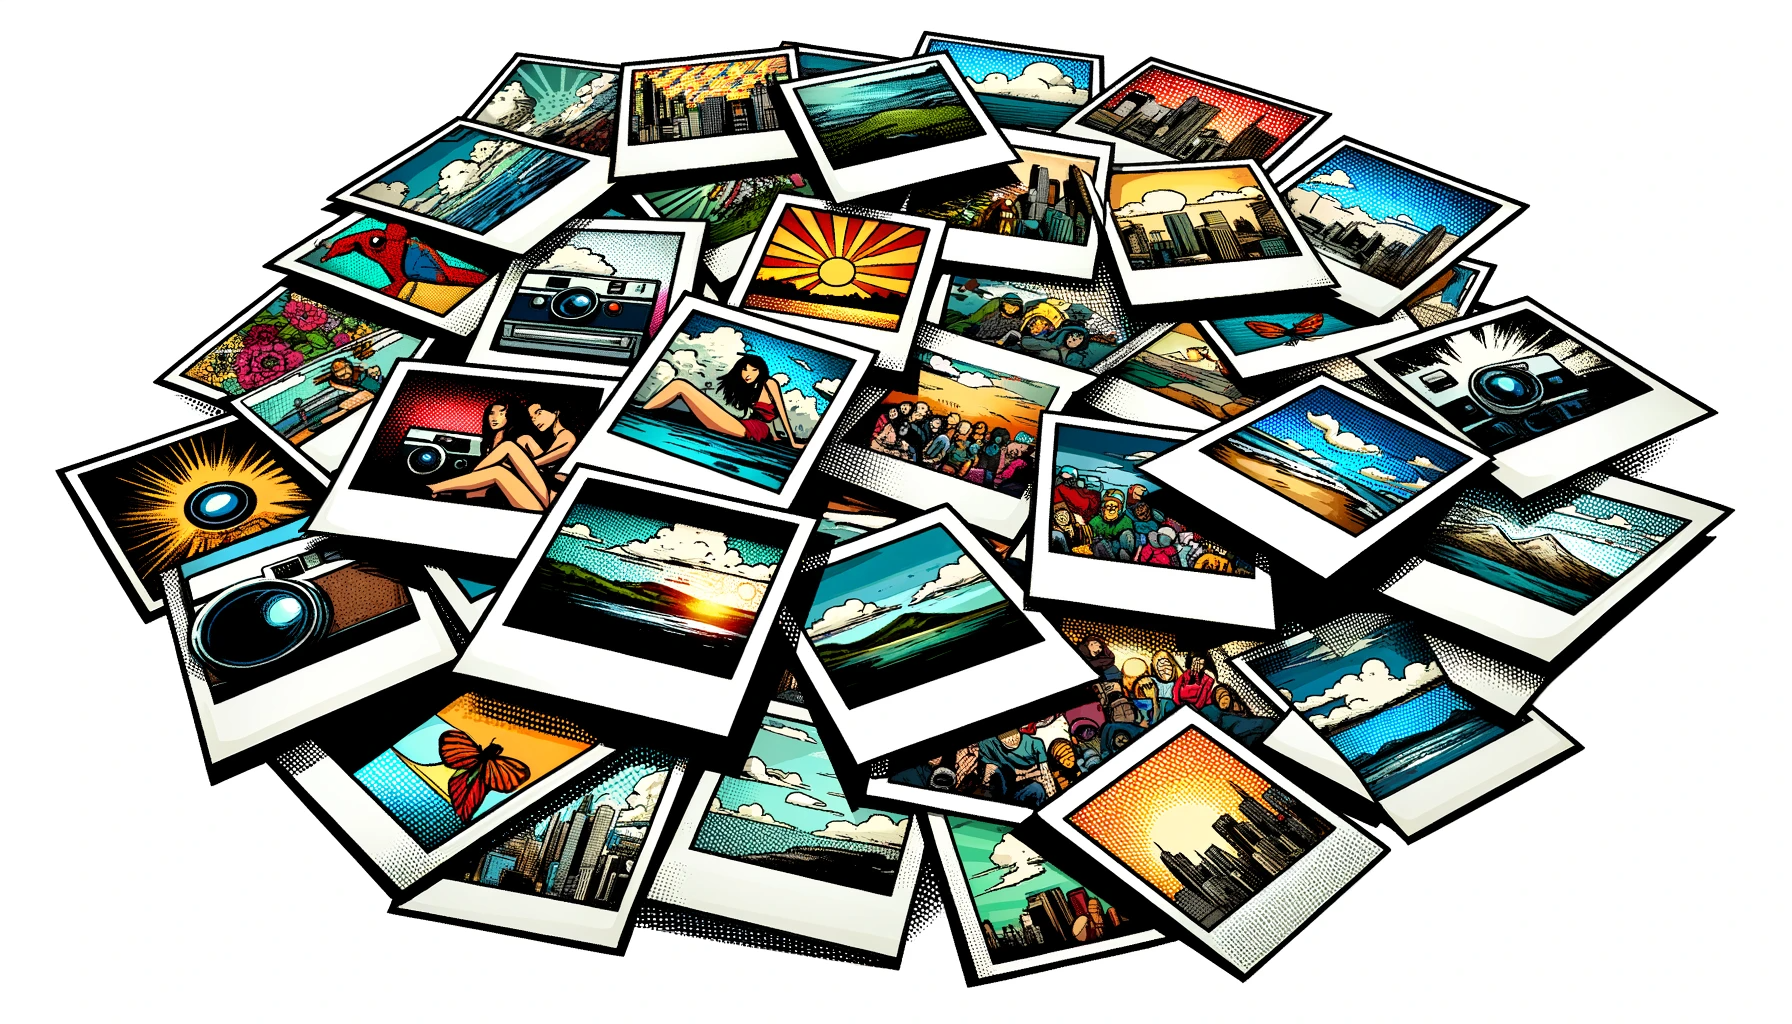 DALL·E 2023-12-14 15.37.03 - A comic book style depiction of a selection of Polaroid-style photographs laid out on a flat surface, with the requirement that all edges of the image